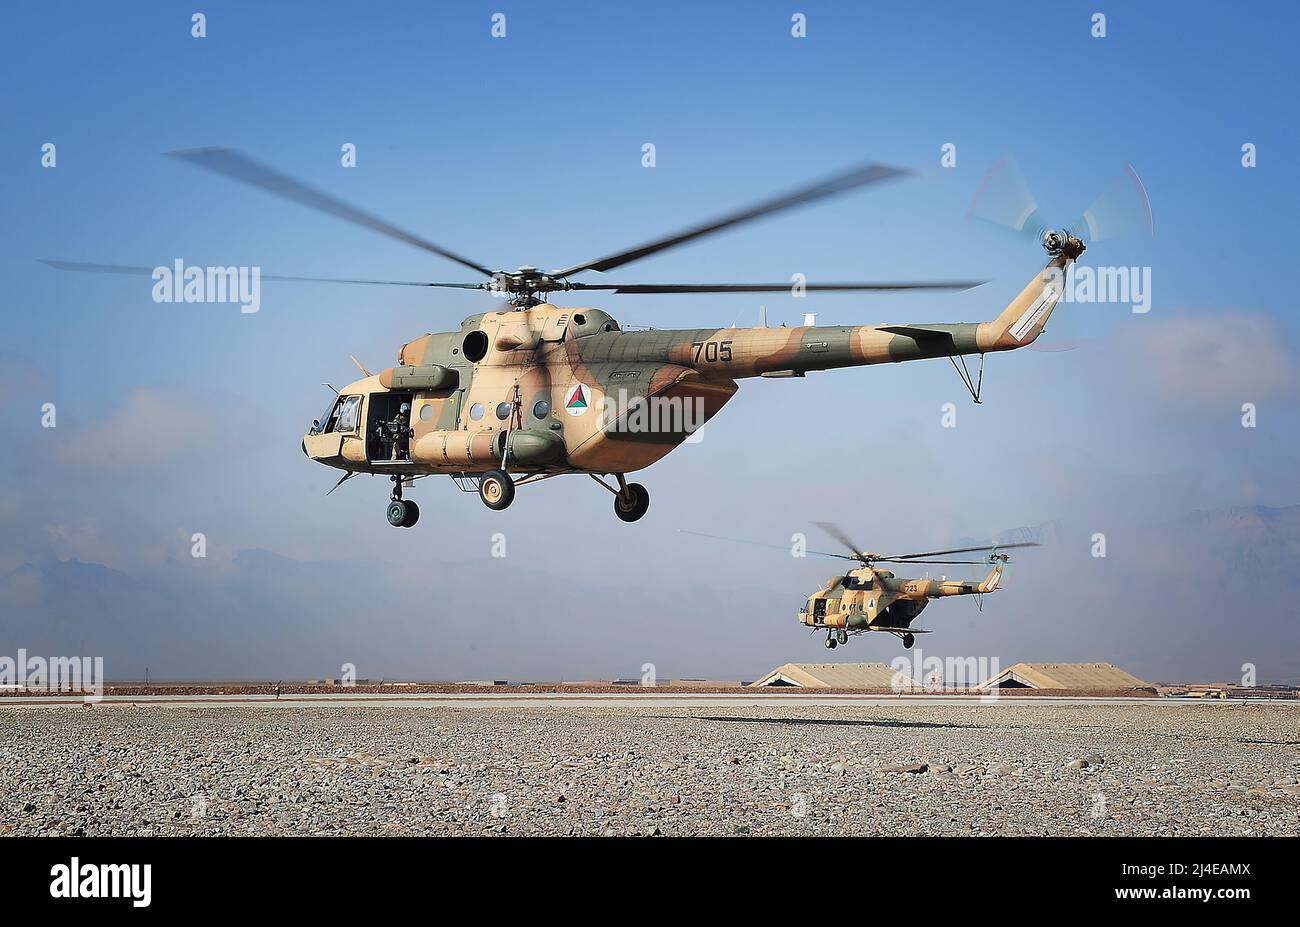 Mi-17 helicopters operated by the 2nd Wing of the Afghan National Army Air Force take off at Multinational Base Tarin Kowt in Uruzgan province, Afghanistan, Feb. 23, 2013. (U.S. Army photo/Released) The Mil Mi-17 (NATO reporting name: Hip) is a Soviet-designed Russian military helicopter family introduced in 1975 (Mi-8M), continuing in production as of 2021 at two factories, in Kazan and Ulan-Ude. It is known as the Mi-8M series in Russian service. Stock Photo